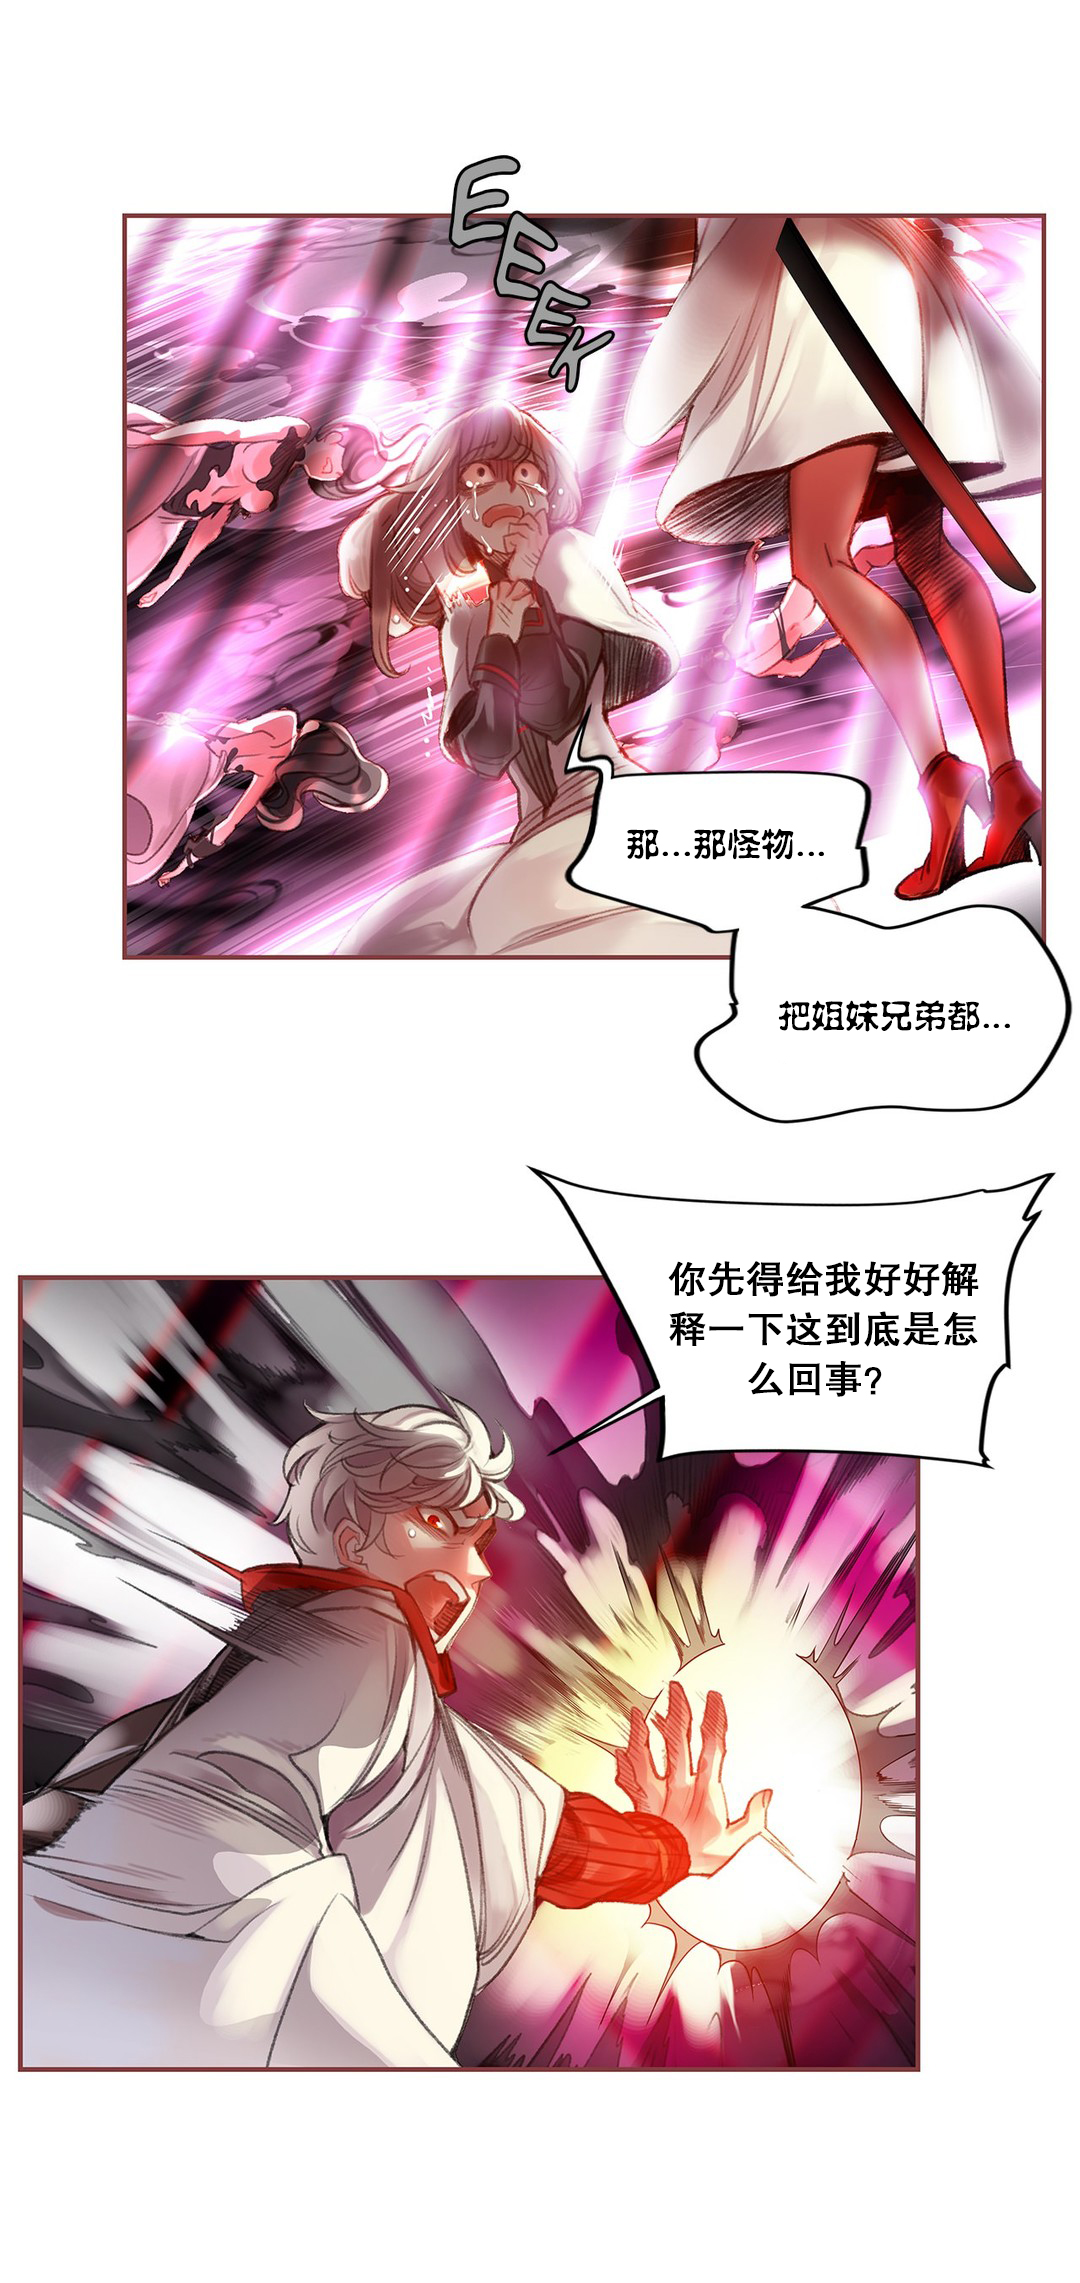 [Juder] Lilith`s Cord (第二季) Ch.61-62 [Chinese] [aaatwist个人汉化] [Ongoing] 